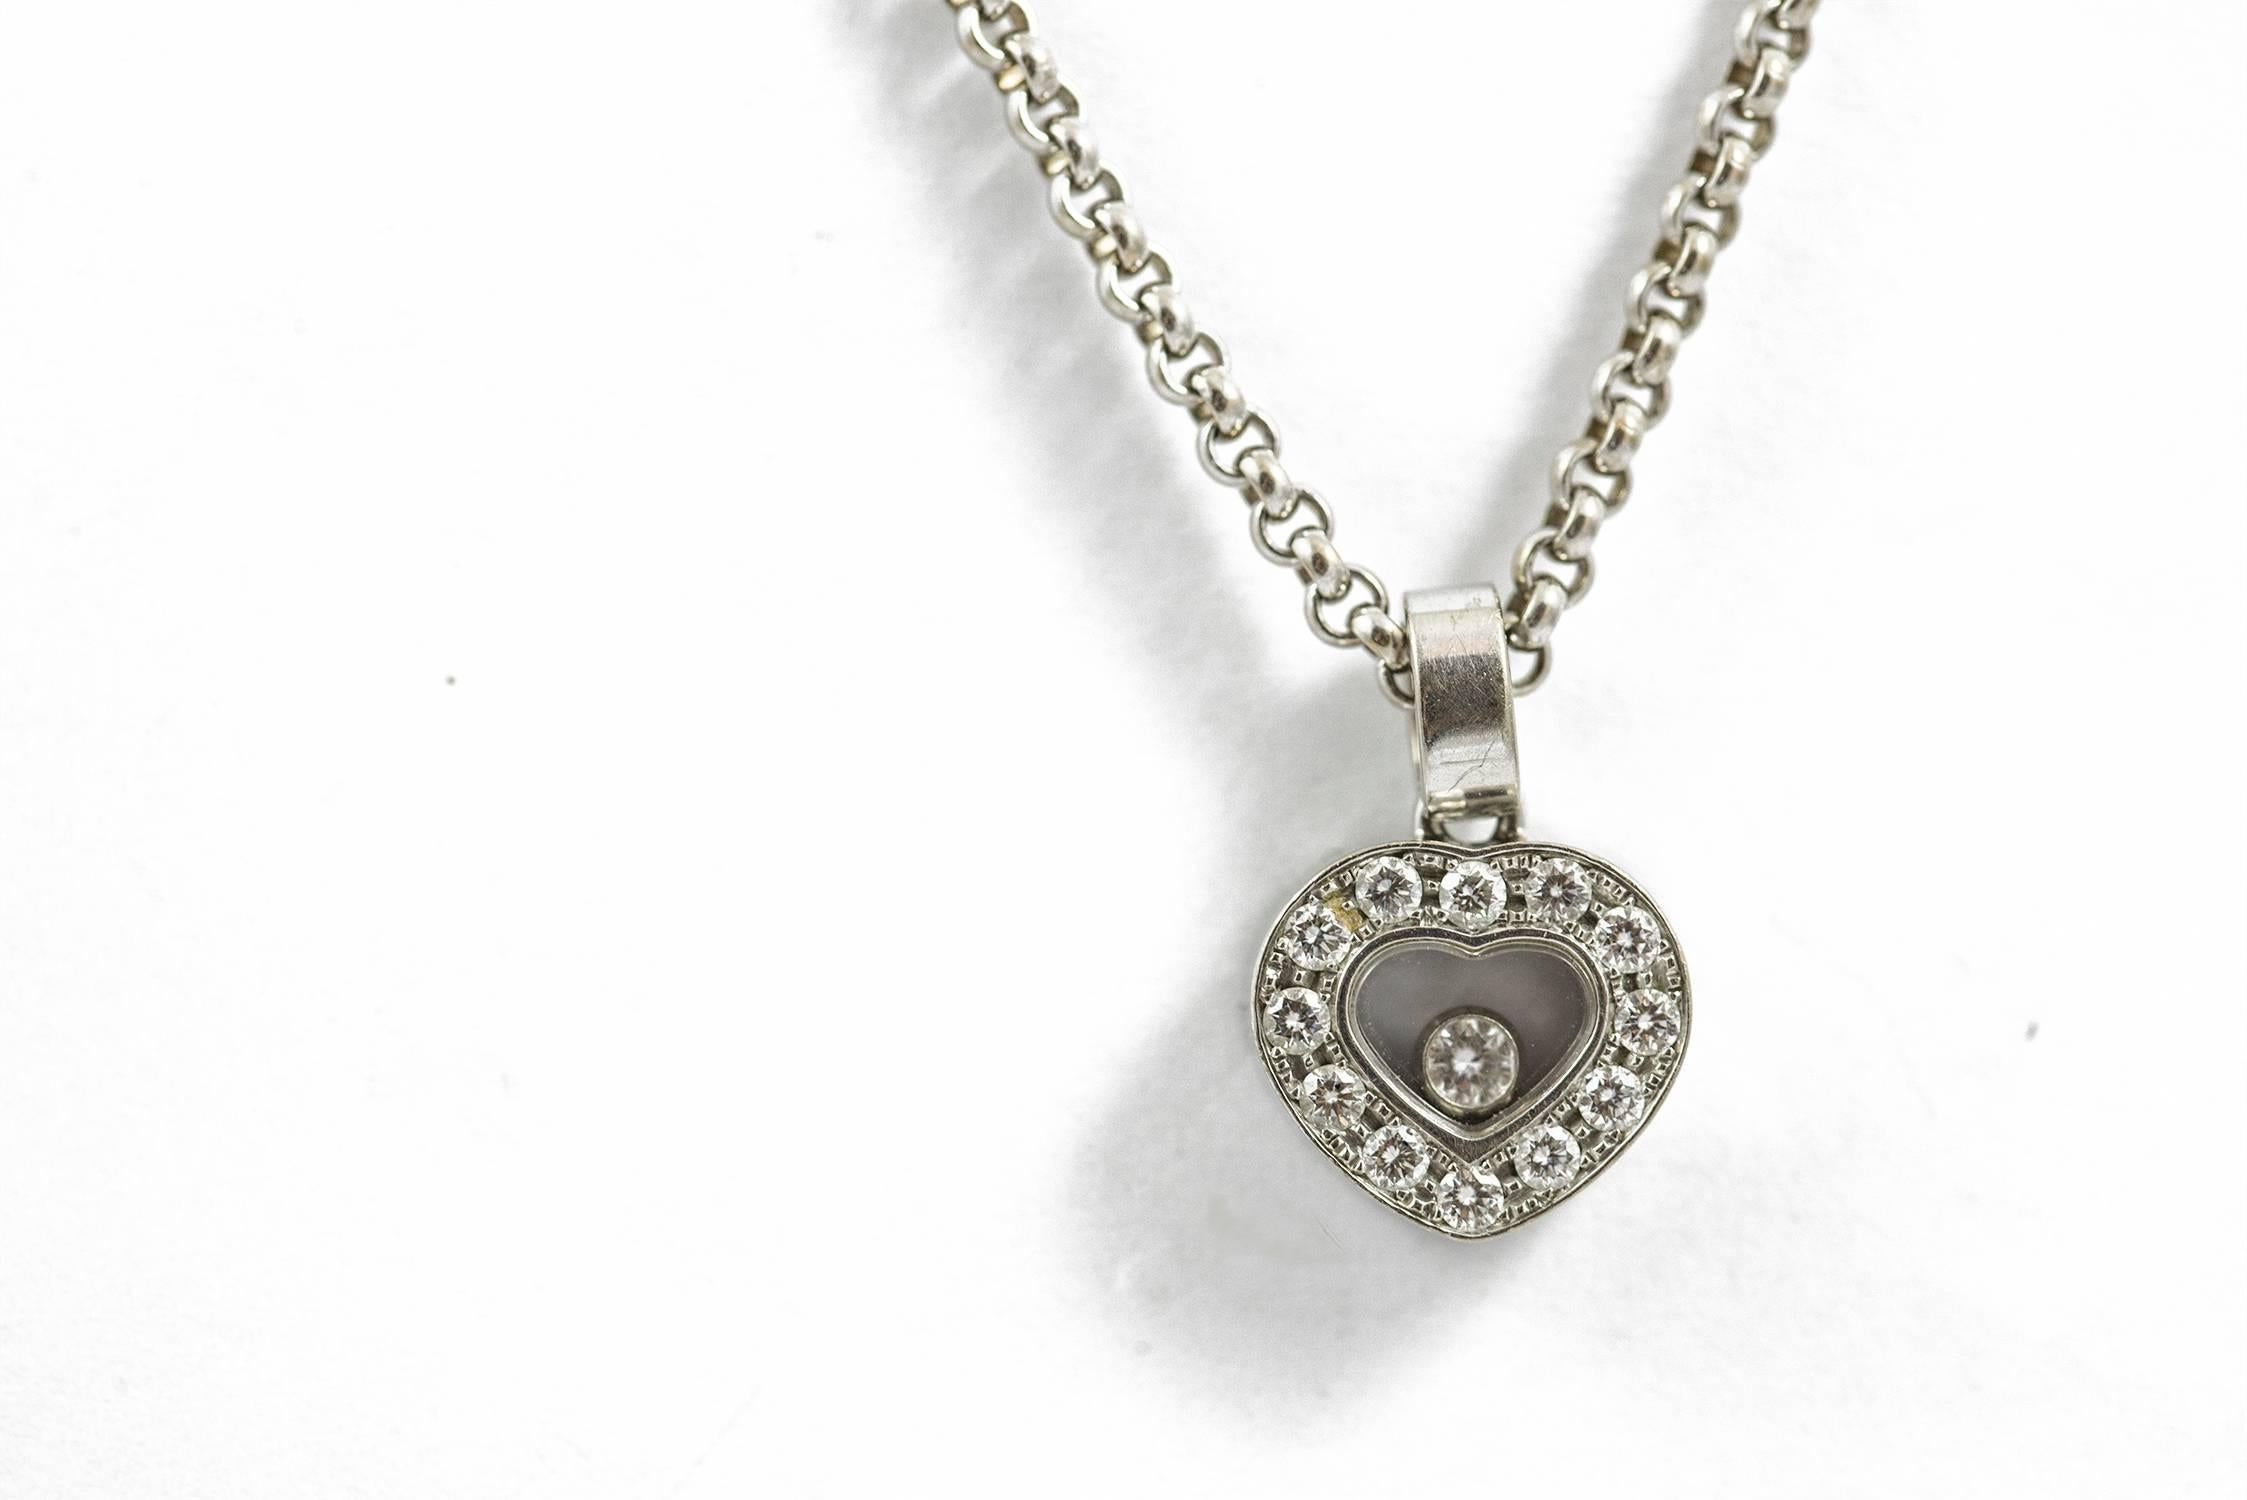 A vintage Chopard Happy Diamond necklace set in 18k white gold. The stylized signature heart holds thirteen high quality, round brilliant cut diamonds (.30 ct. E-F, VVS). This necklace measures 17 inches and the Chopard heart drops 1/2 inch below